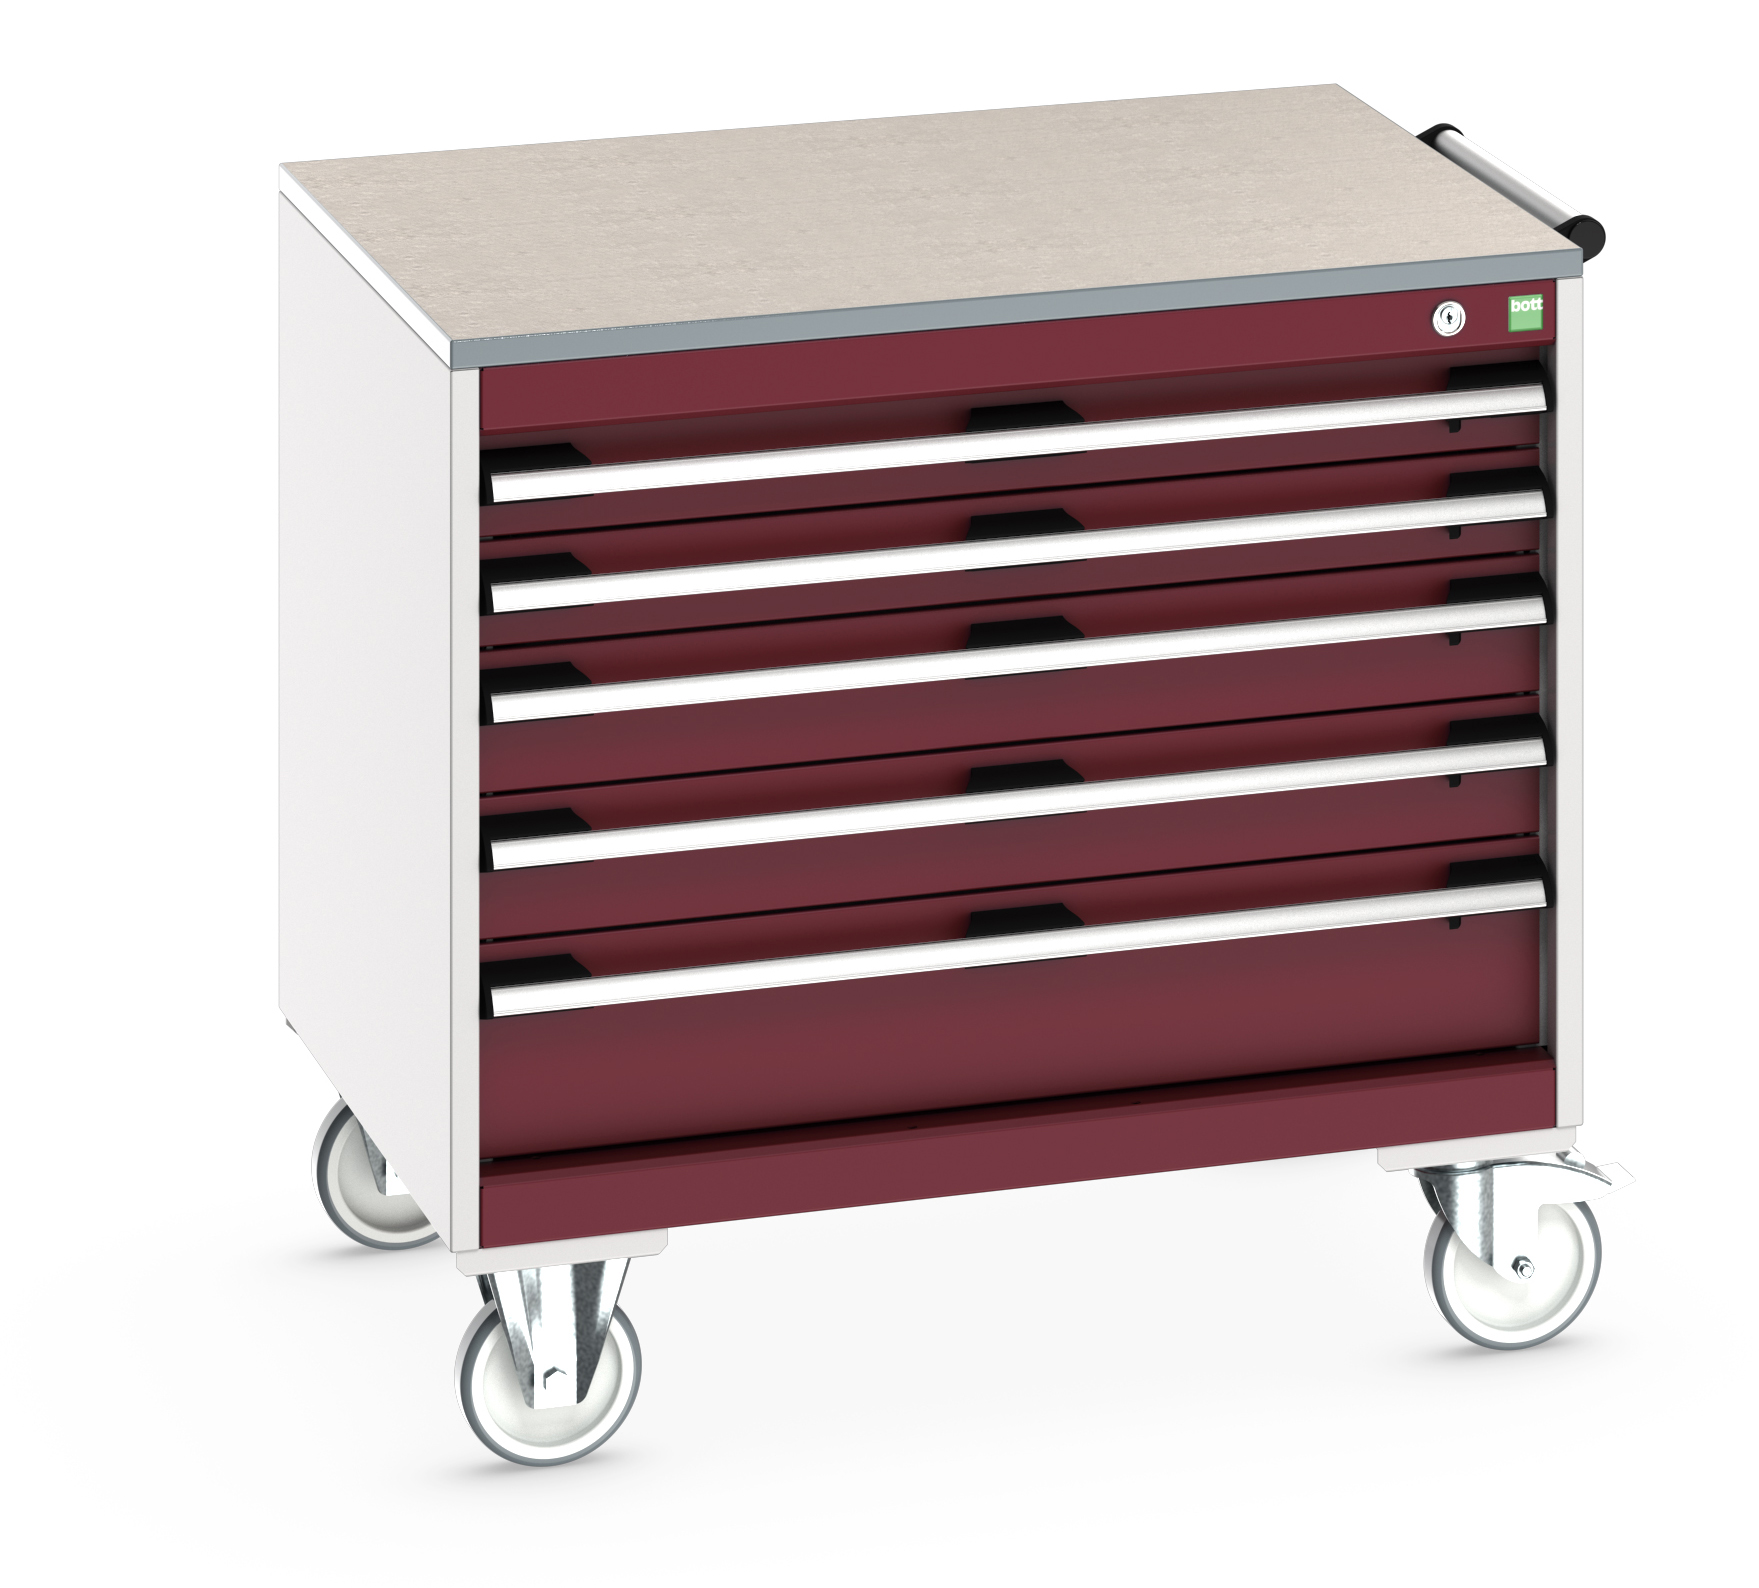 Bott Cubio Mobile Drawer Cabinet With 5 Drawers & Lino Worktop - 40402154.24V